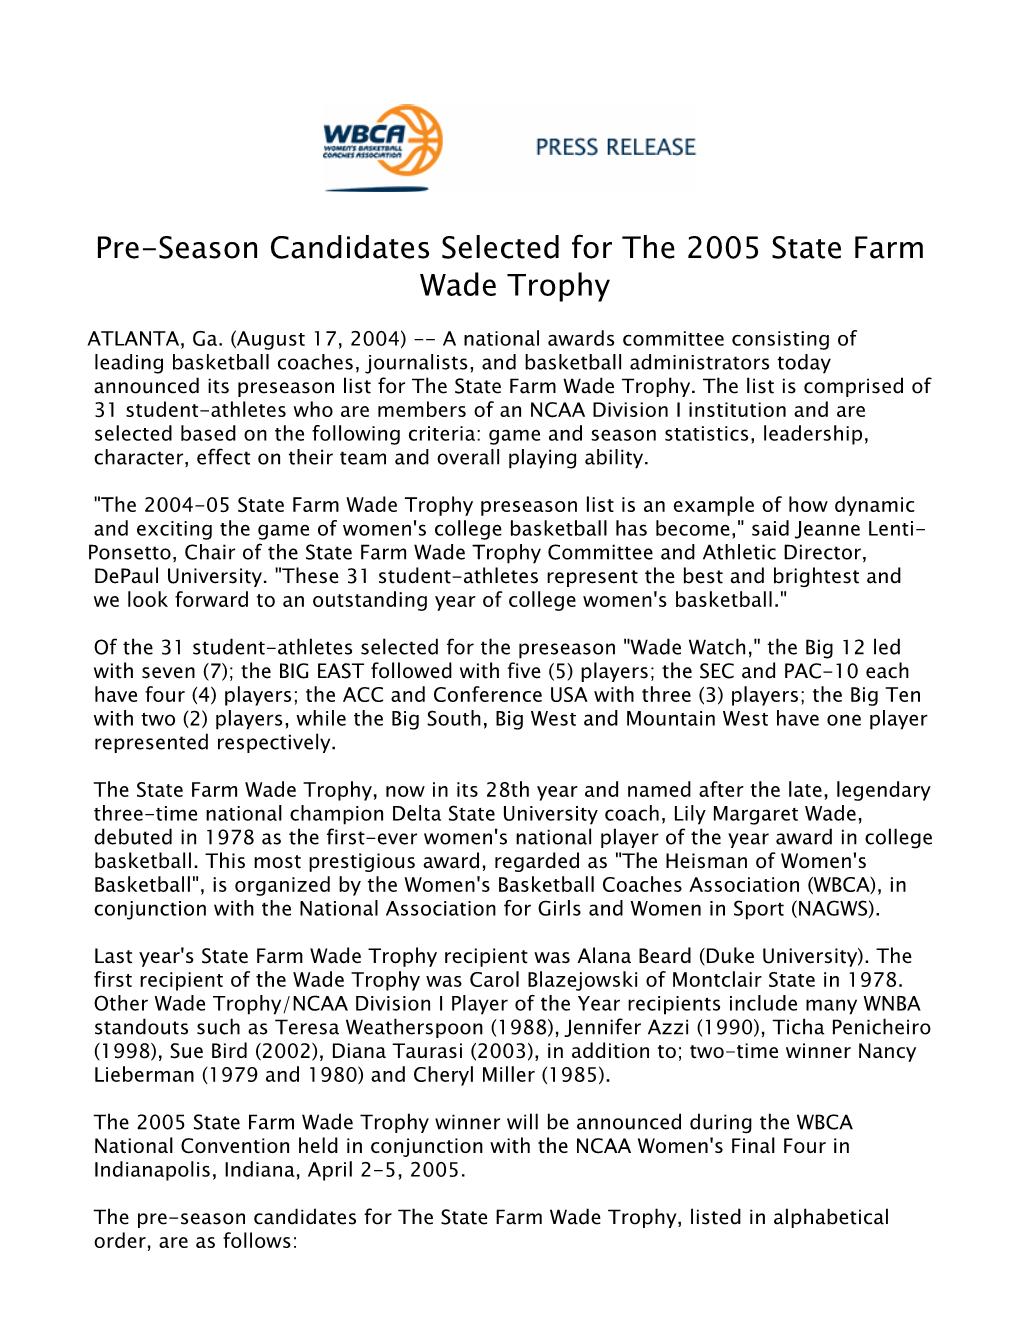 Pre-Season Candidates Selected for the 2005 State Farm Wade Trophy